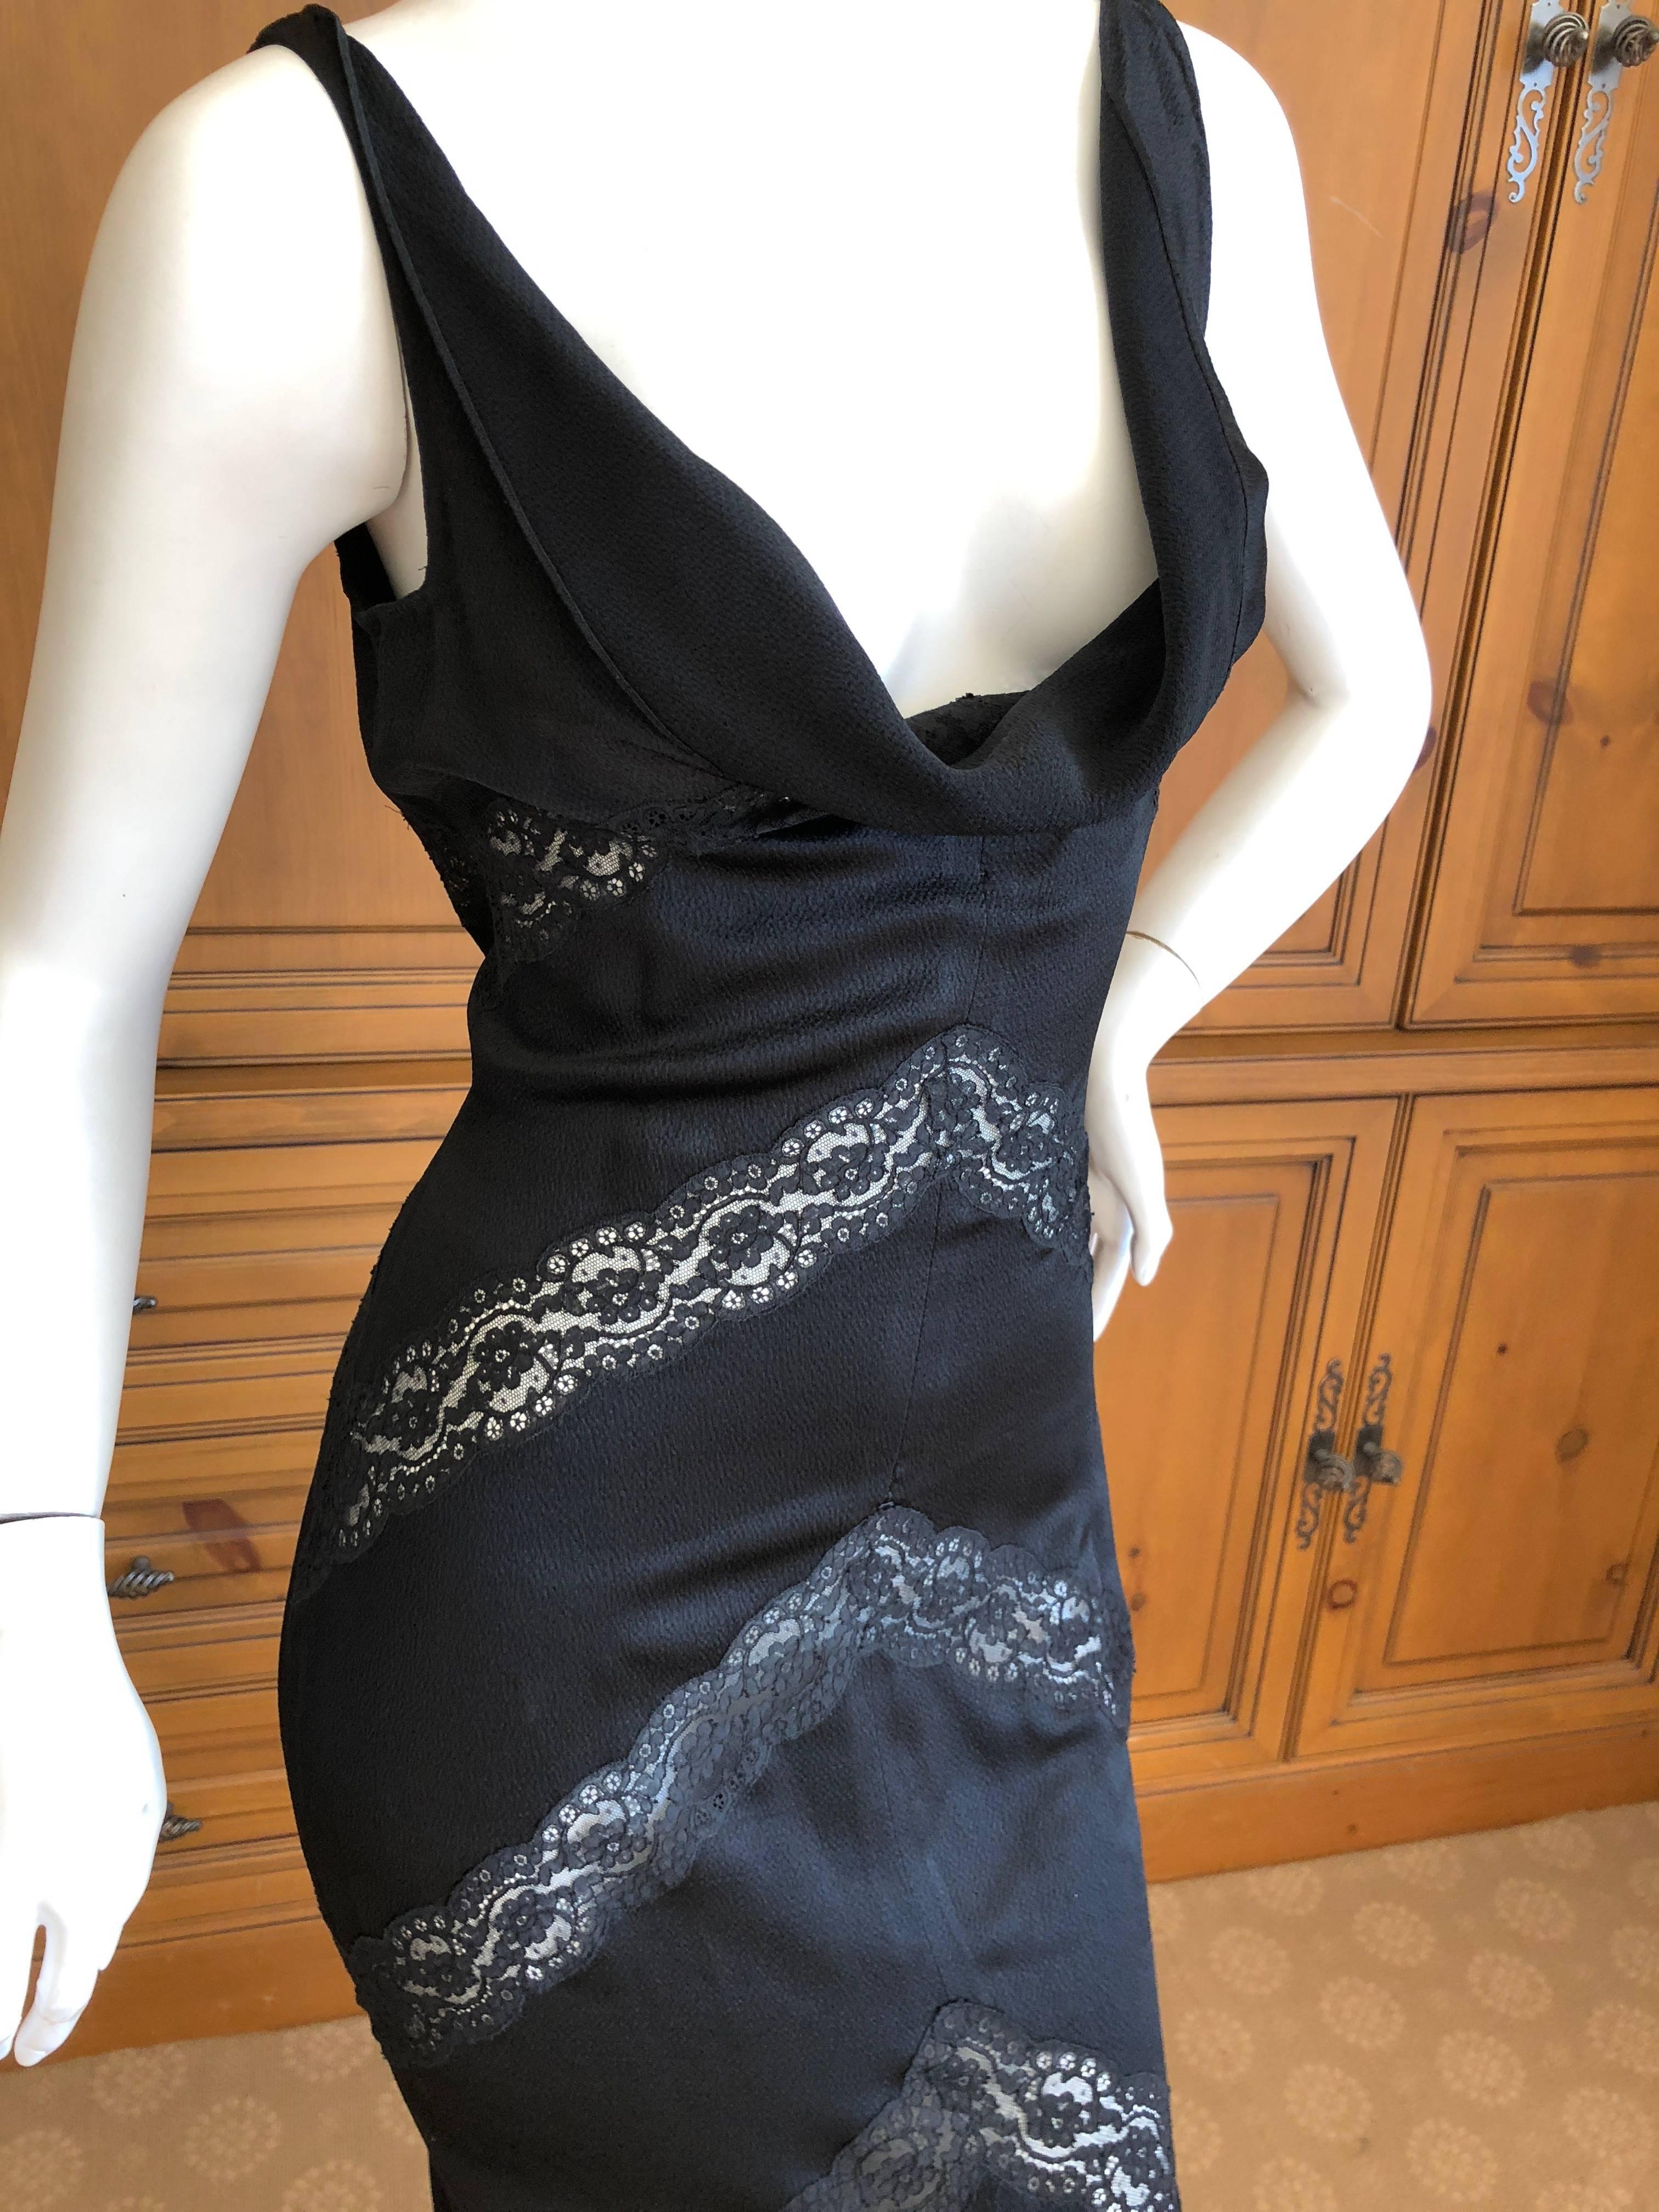 Christian Dior by John Galliano Black Lace Insert Evening Dress with Train 1